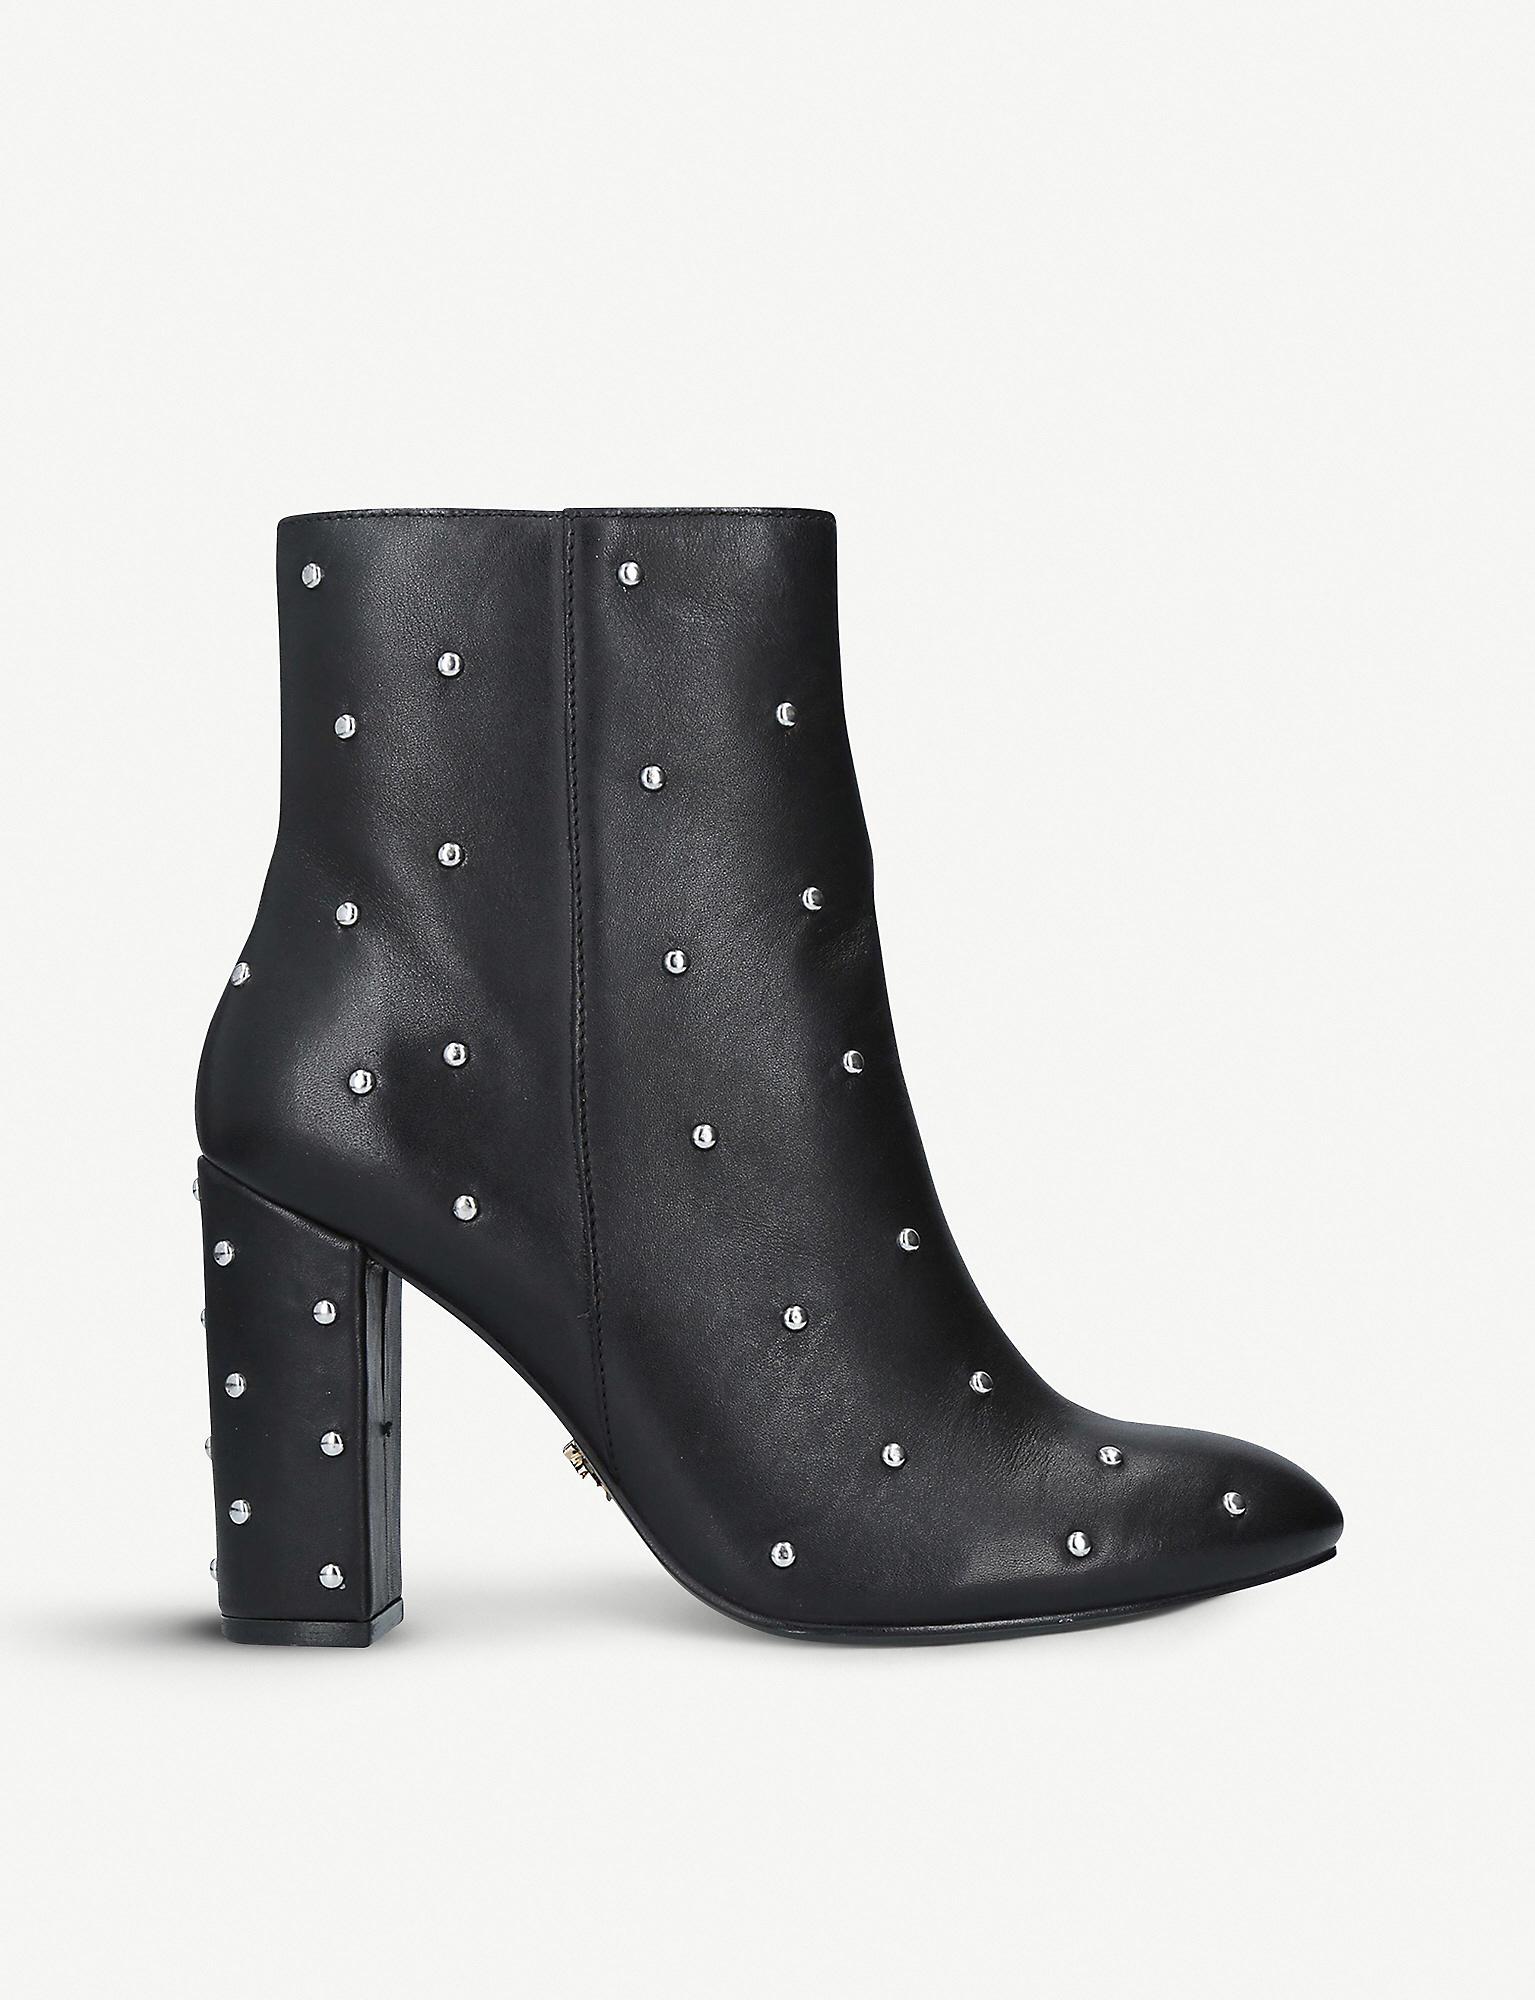 Kurt Geiger Swiss Studded Leather Ankle Boots in Black - Save 51% - Lyst